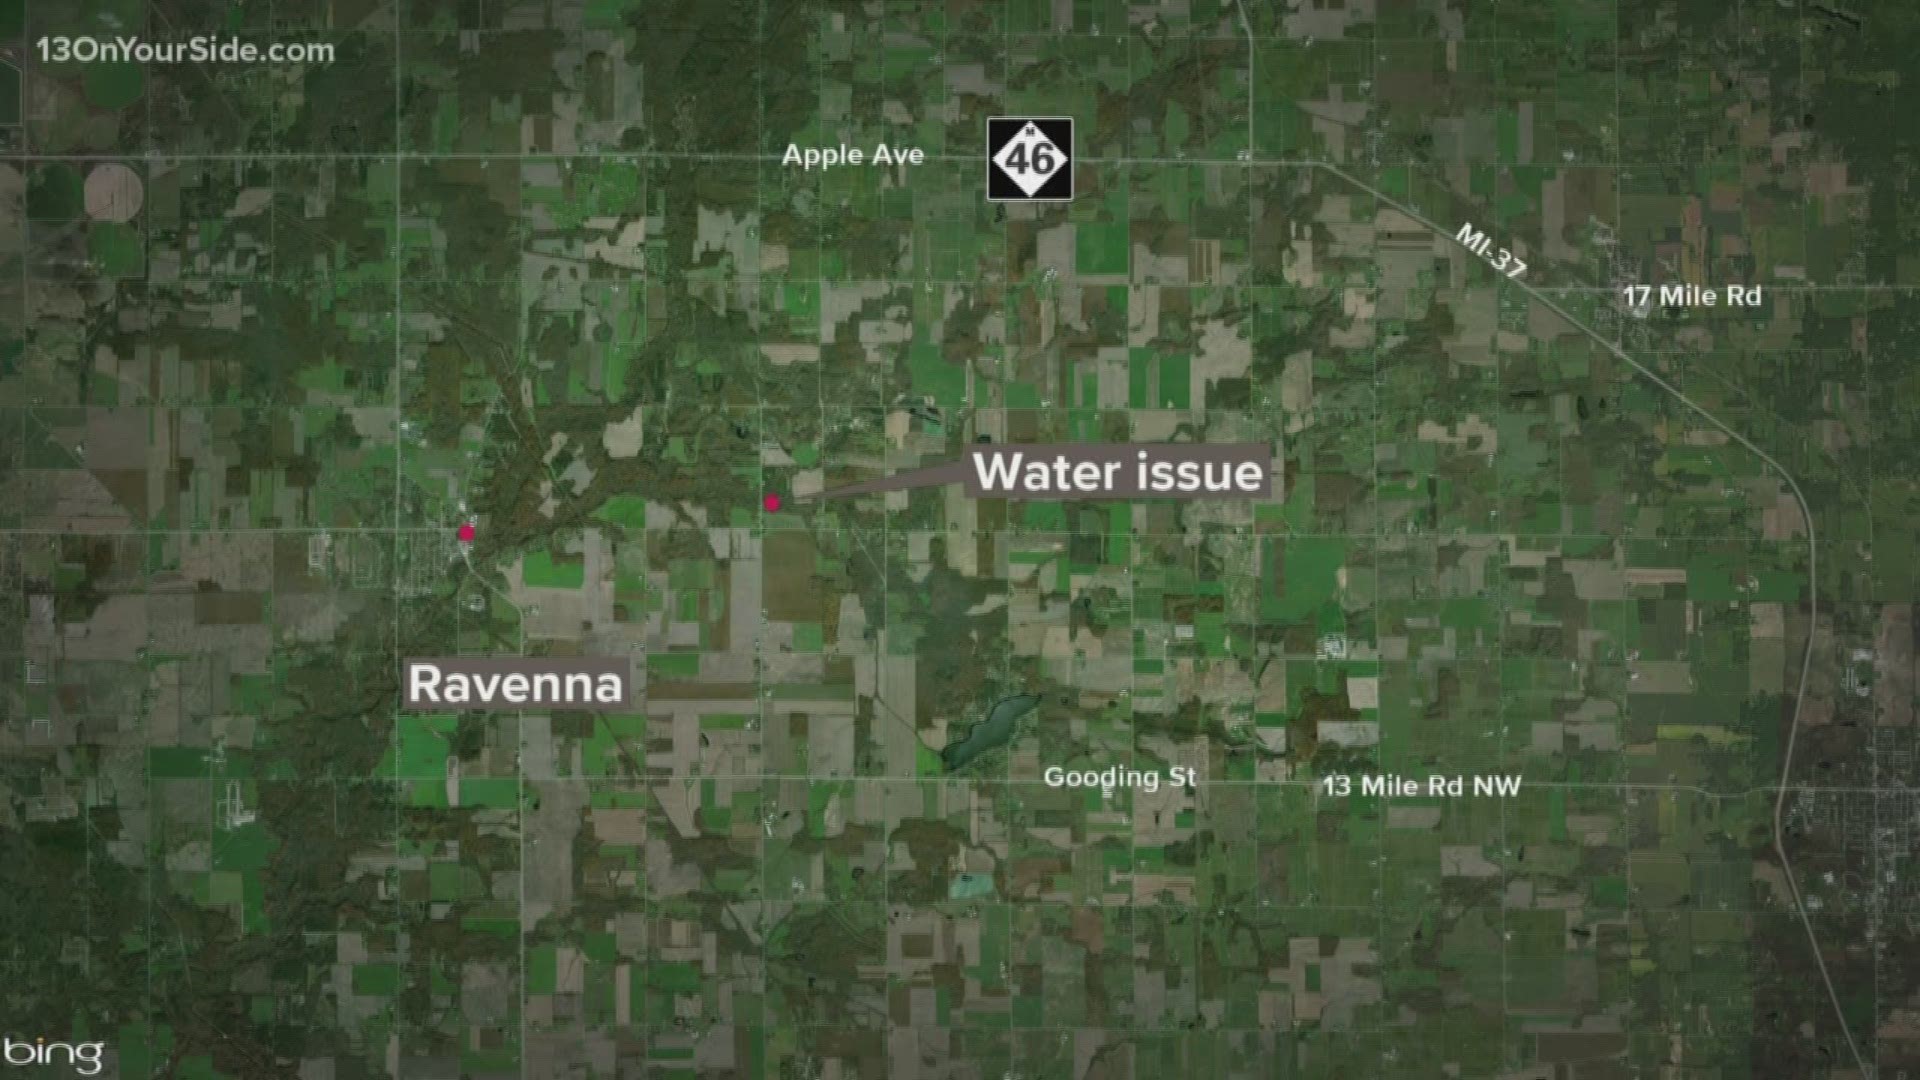 Officials are asking to stay out of Crockery Creek just north of Ravenna for what looks like a large mass of manure in the water. Witnesses have reported the water is black and there are signs posted in the area to keep people out while officials remove and investigate the incident.